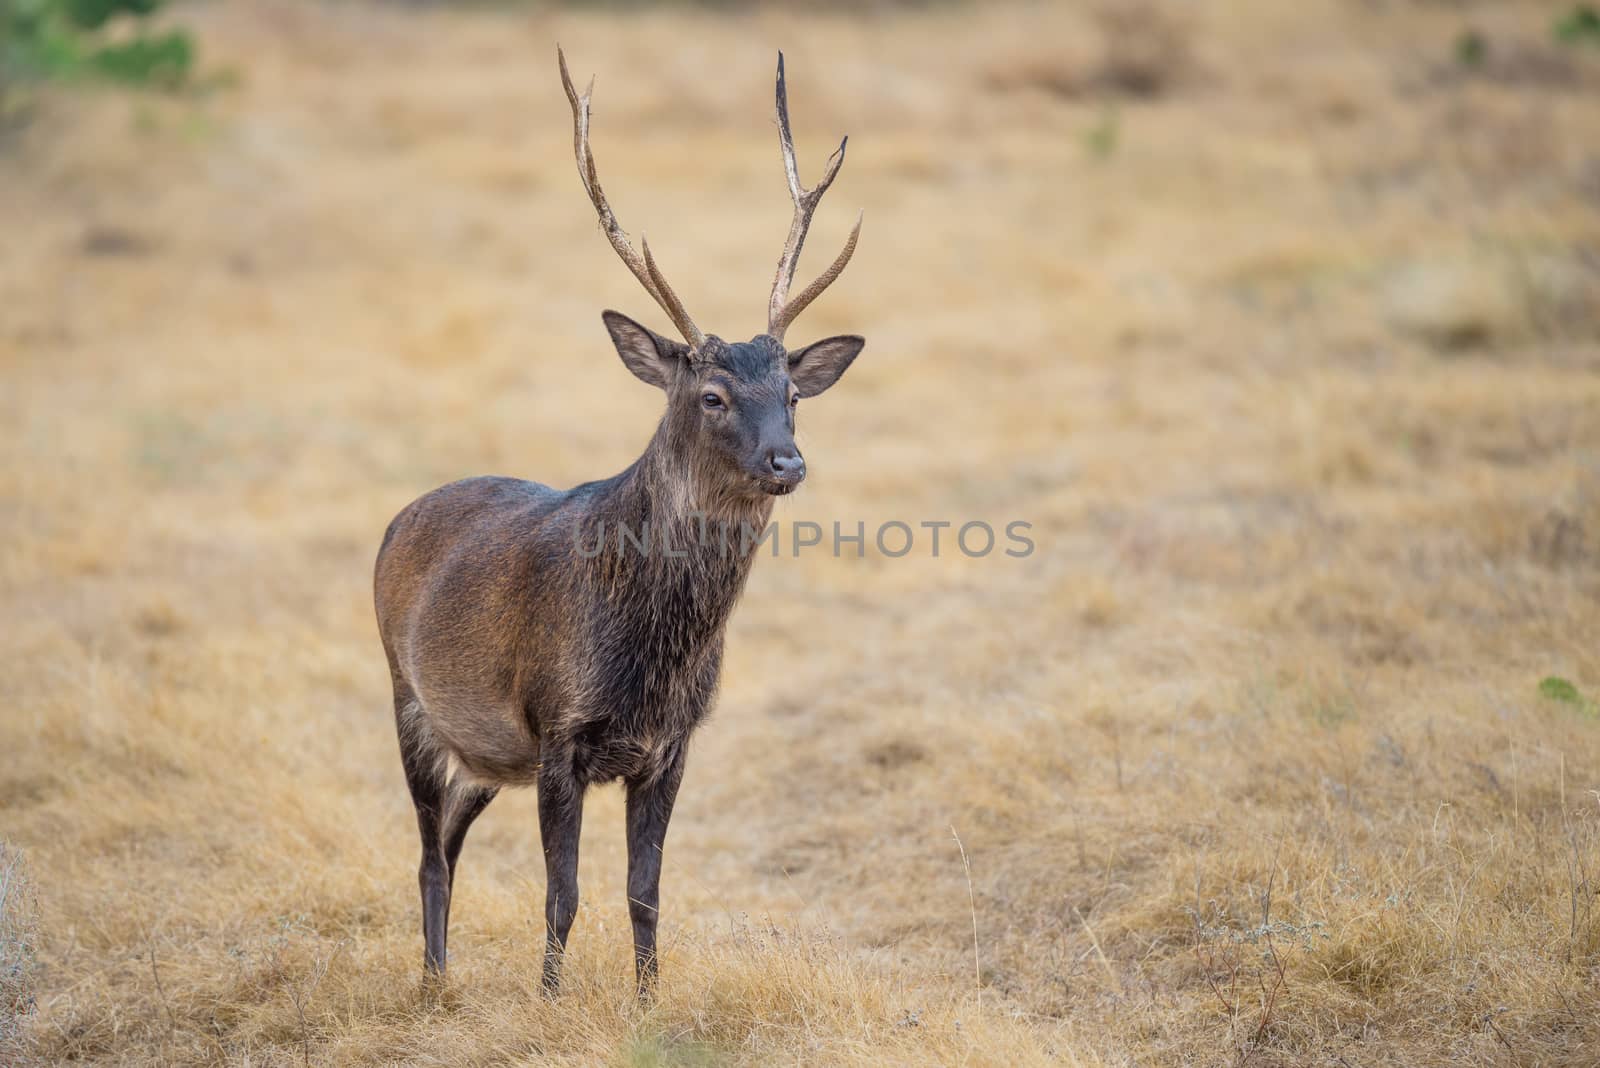 Wild South Texas Sika deer buck. Also known as a Japanese or Spotted Deer.